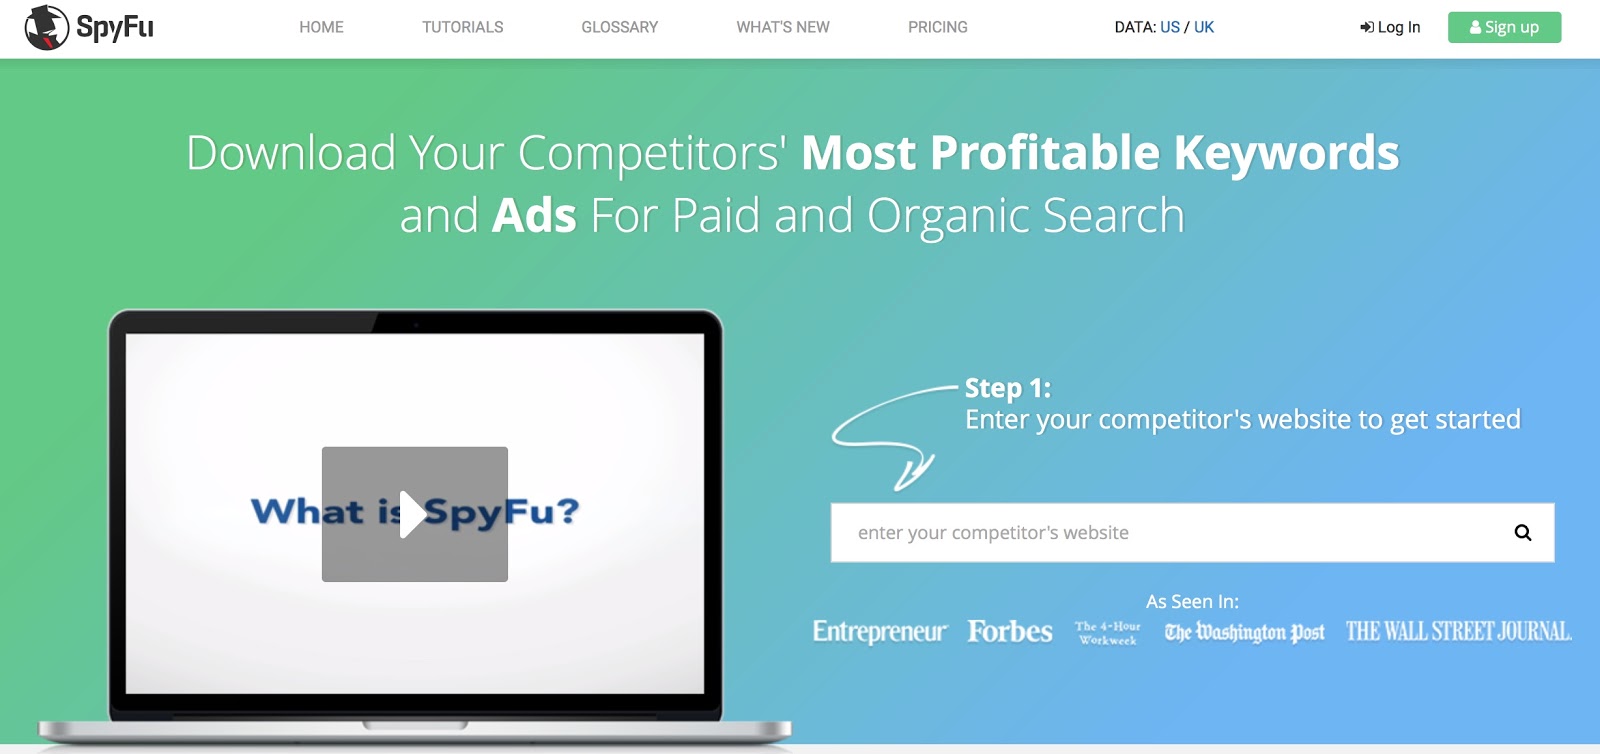 SpyFu Keyword Research Tools Discover The Most Profitable Keywords For PPC SEO